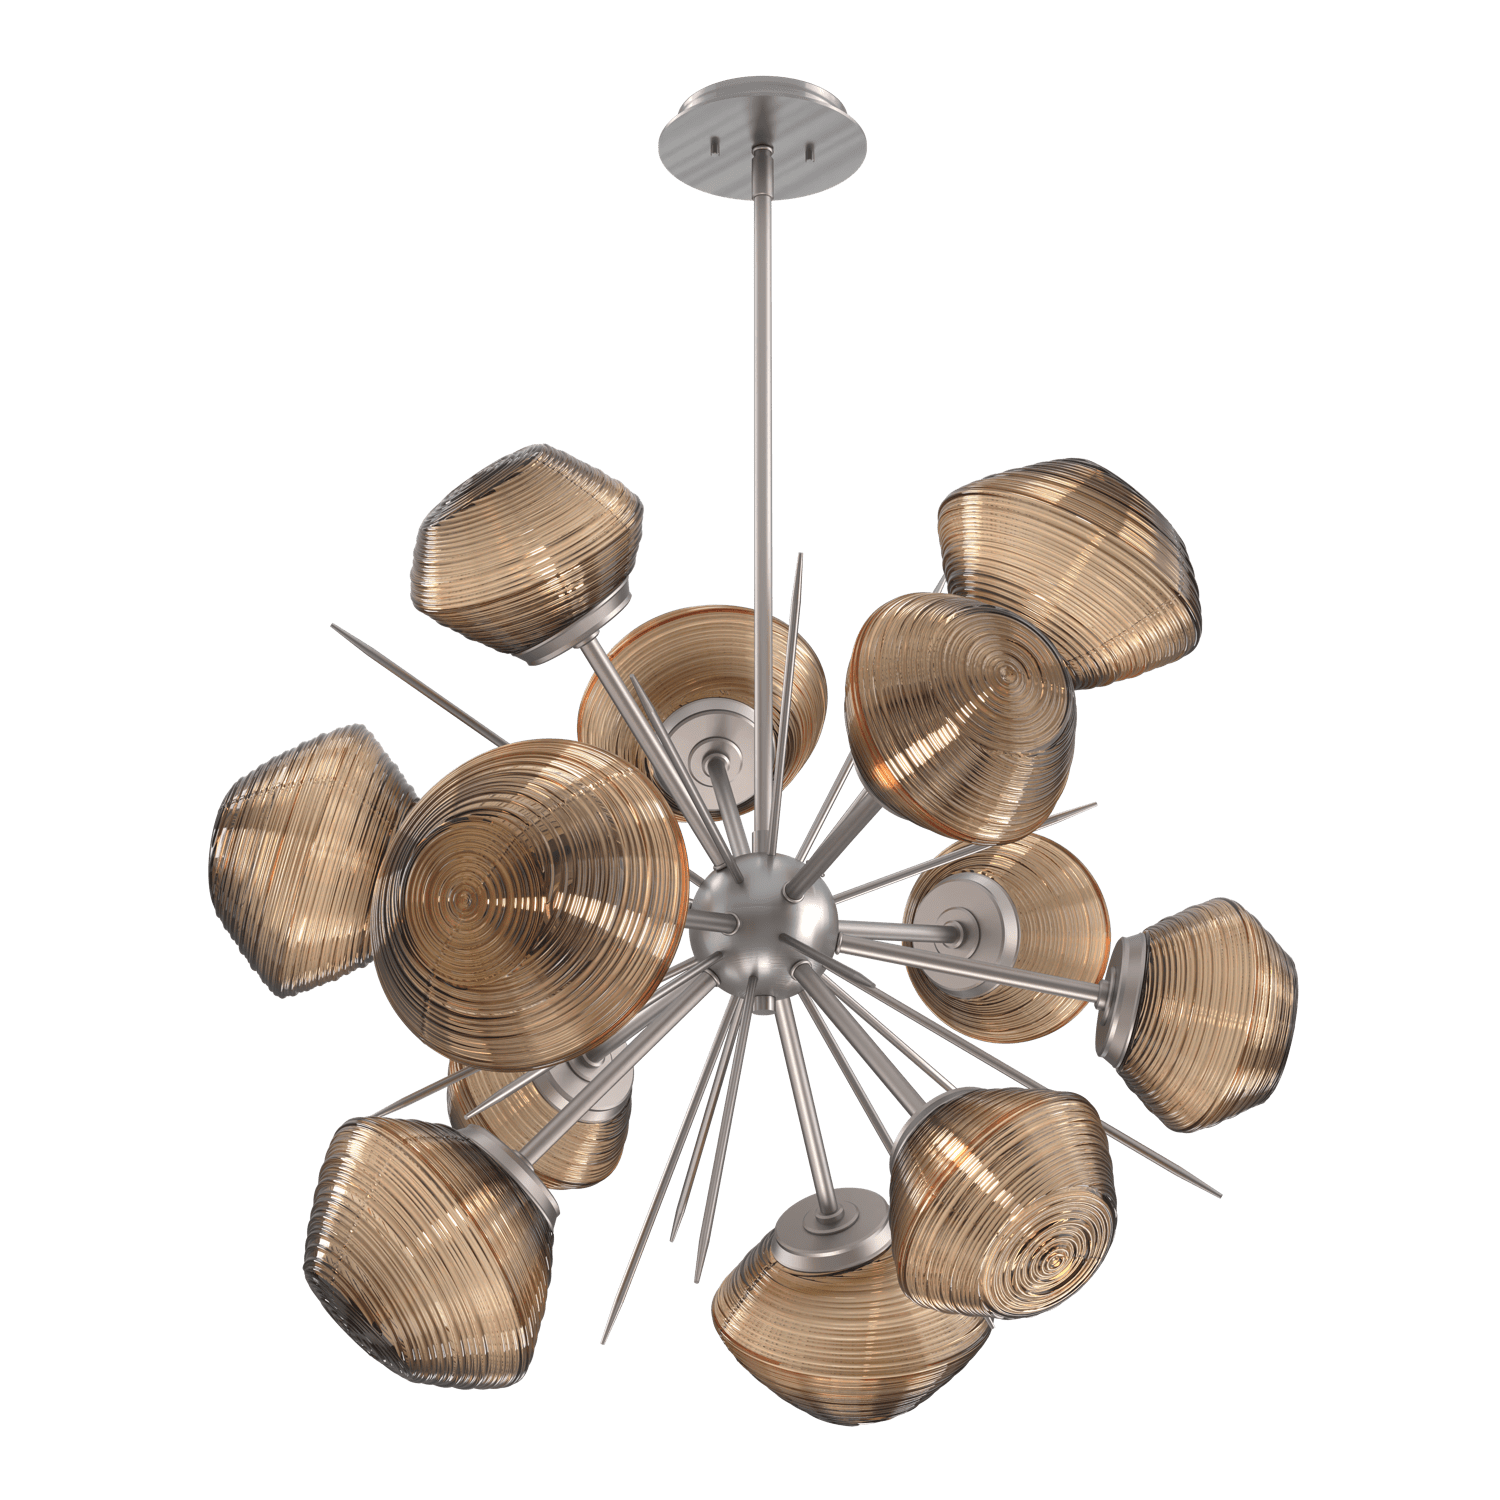 CHB0089-0G-SN-B-Hammerton-Studio-Mesa-36-inch-starburst-chandelier-with-satin-nickel-finish-and-bronze-blown-glass-shades-and-LED-lamping